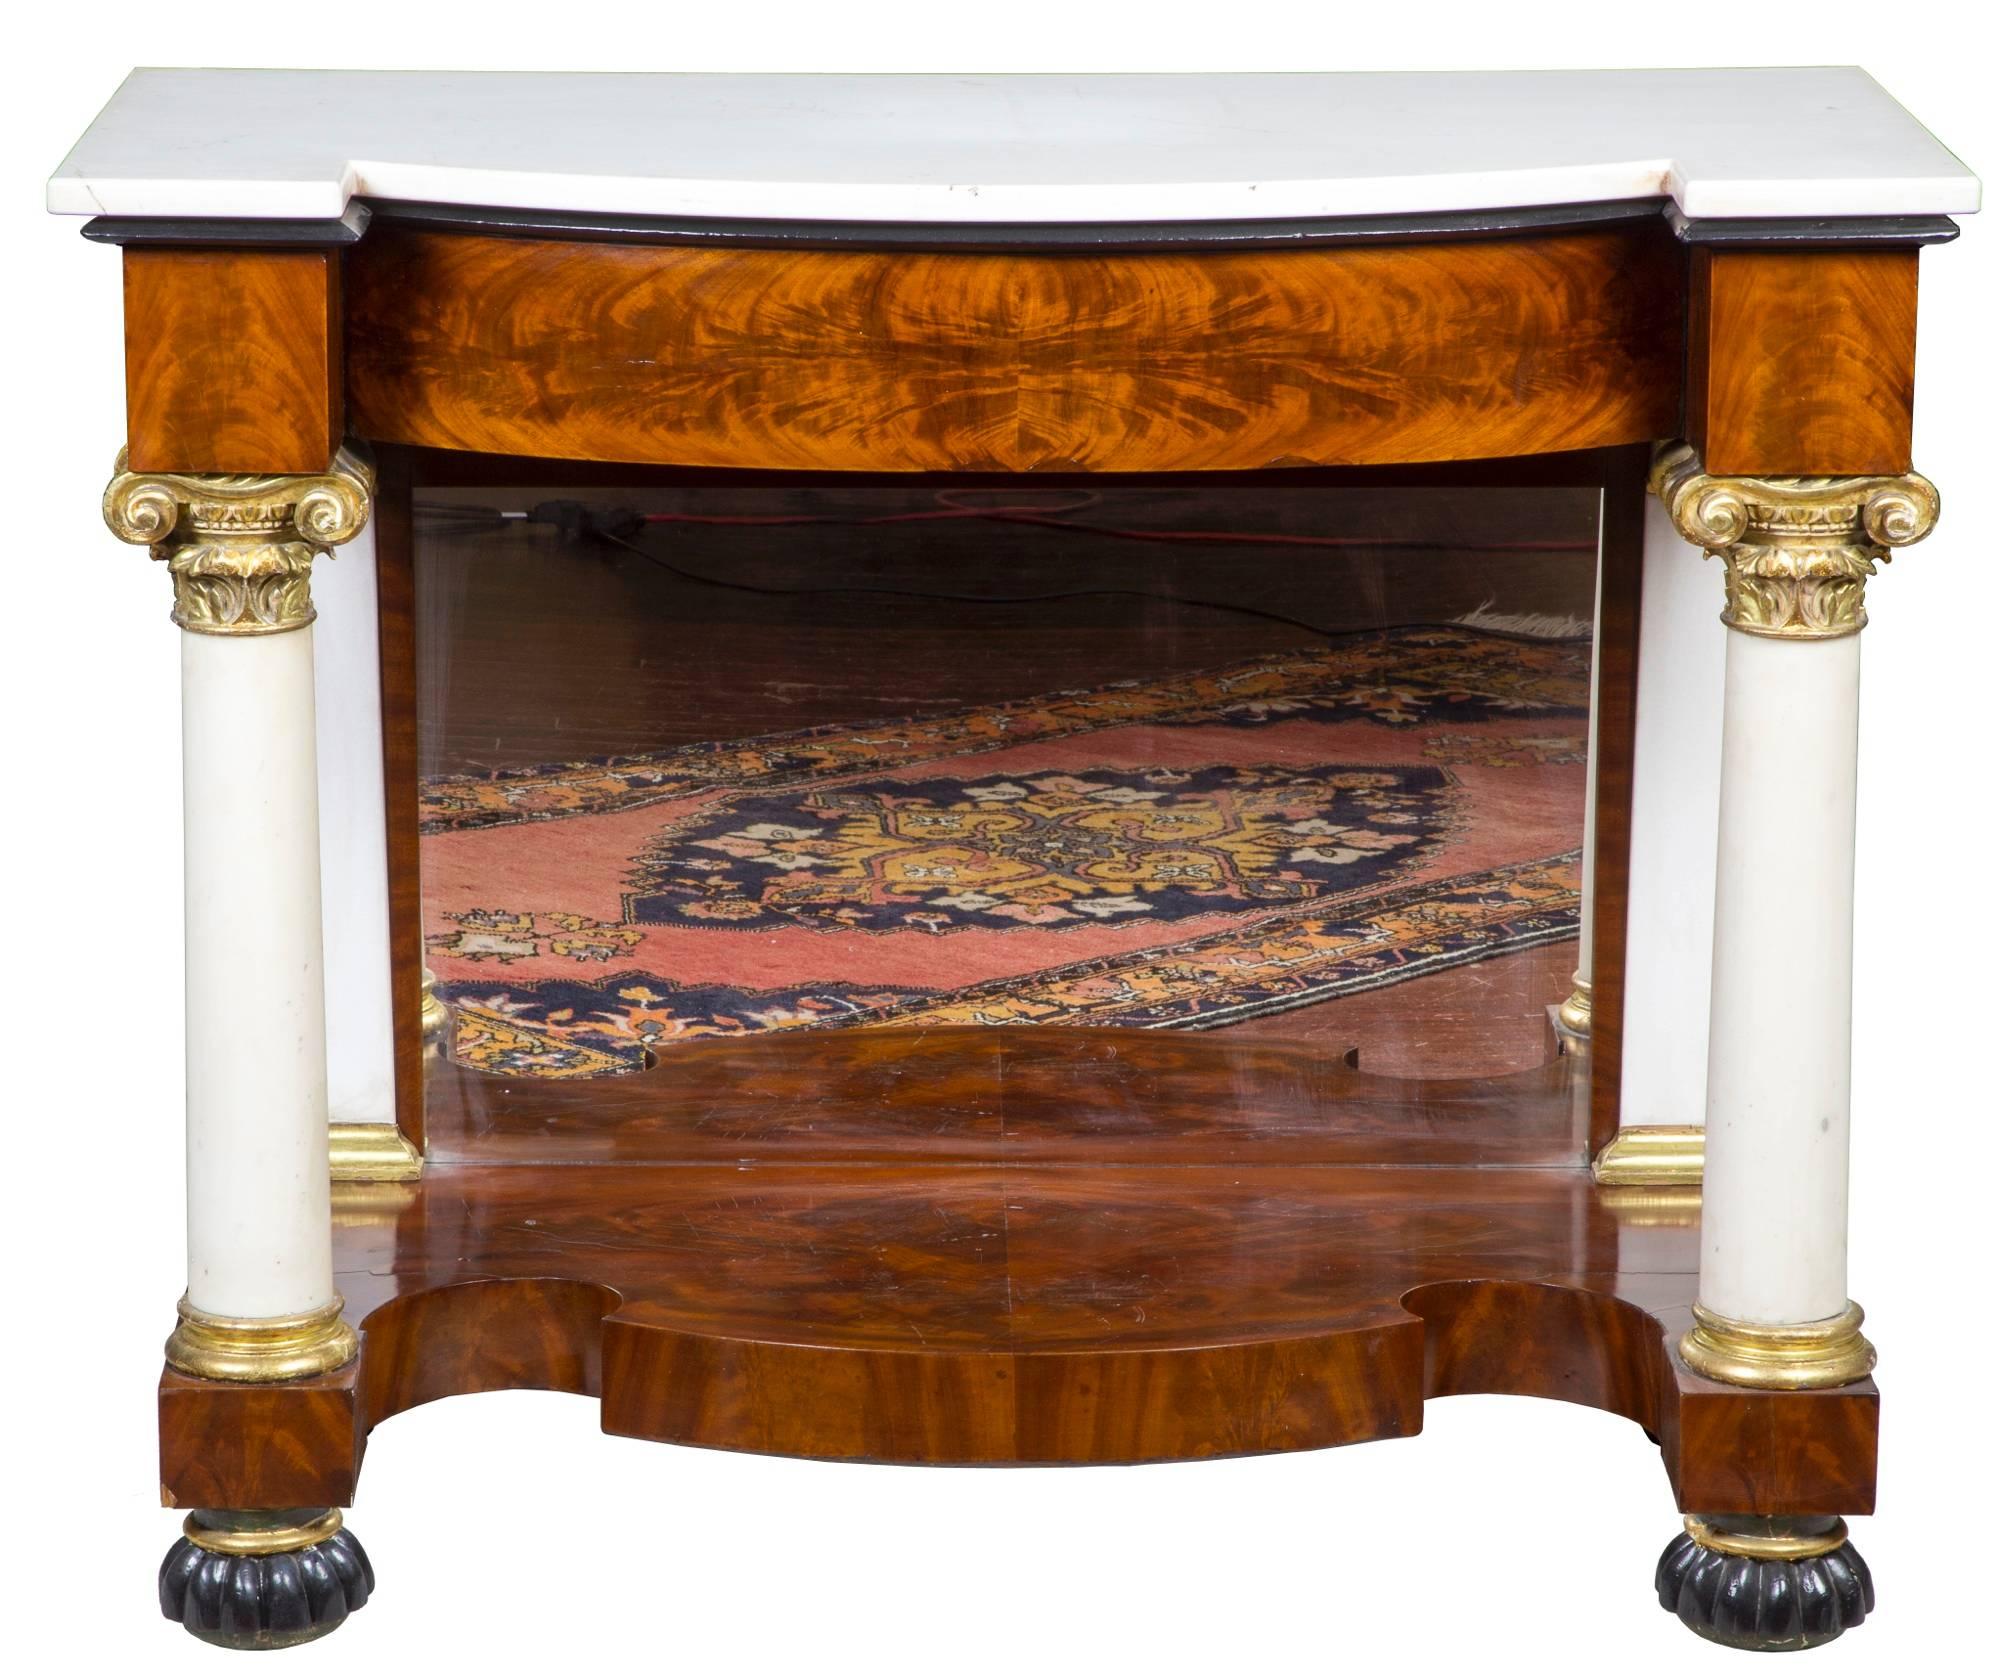 These pier tables are composed of vibrantly figured mahogany with marble columns which are held in place by strongly carved capitals. The capitals are gilt, as are other elements on these tables. These pier tables also have marble pilasters in the